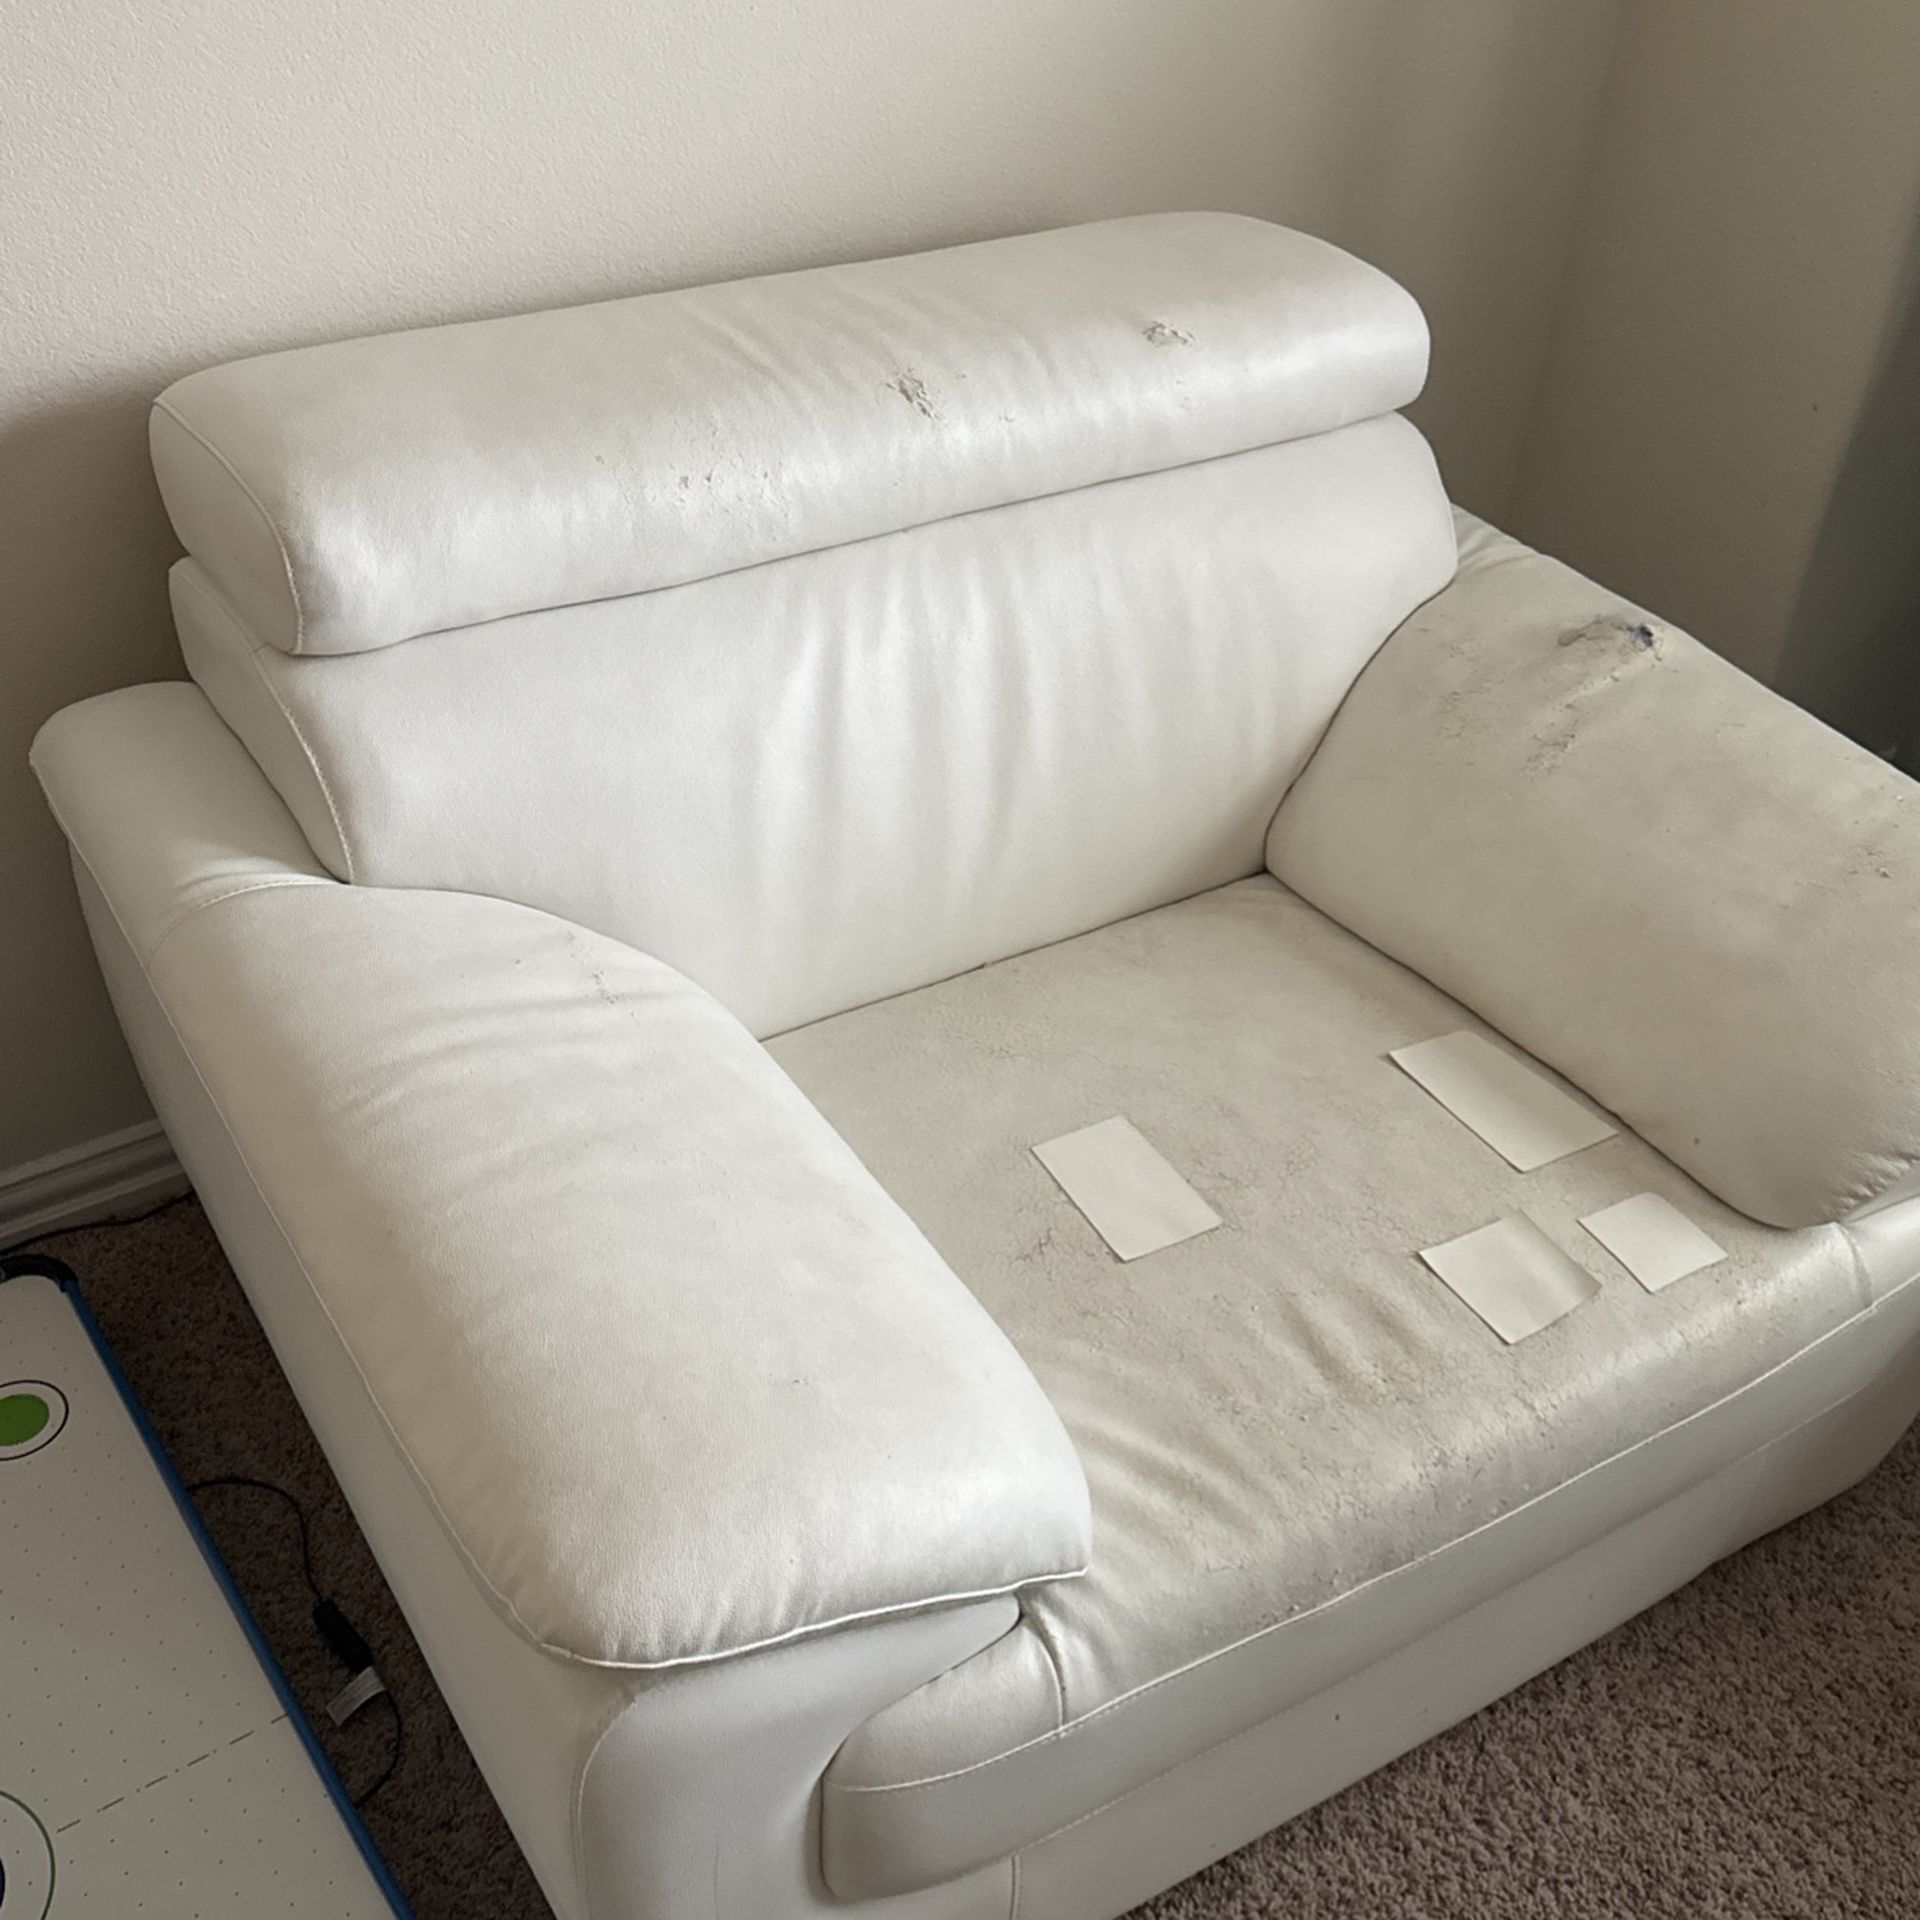 FREE! pickup 3 Pieces Of Sofa And Love Seat 